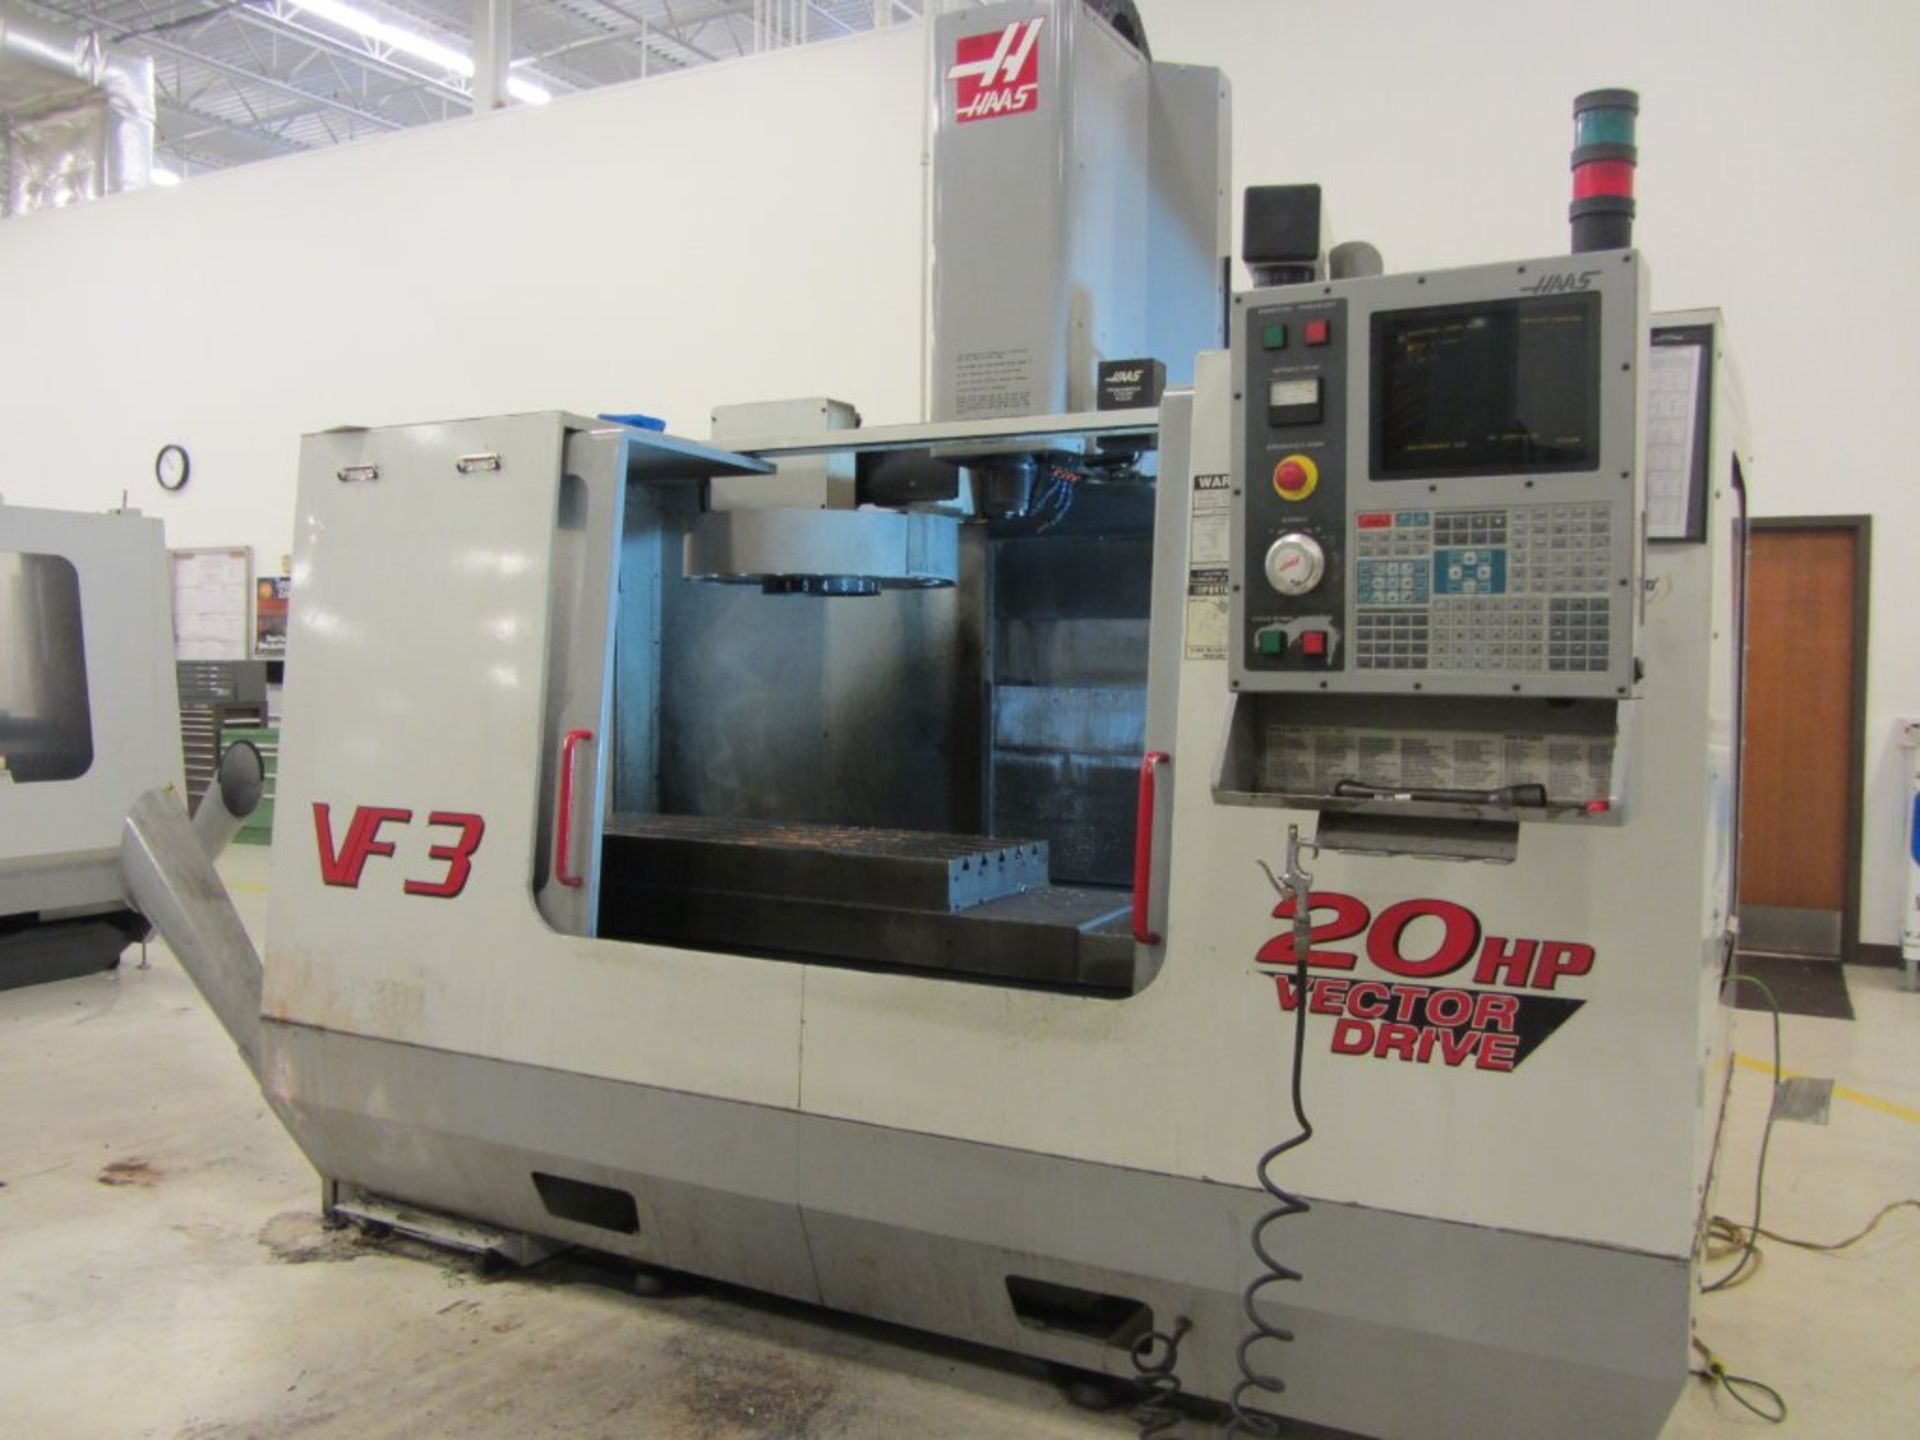 Haas VF-3B CNC Vertical Machining Center with 48'' x 18'' Table, #40 Taper Spindle Speeds to 7500